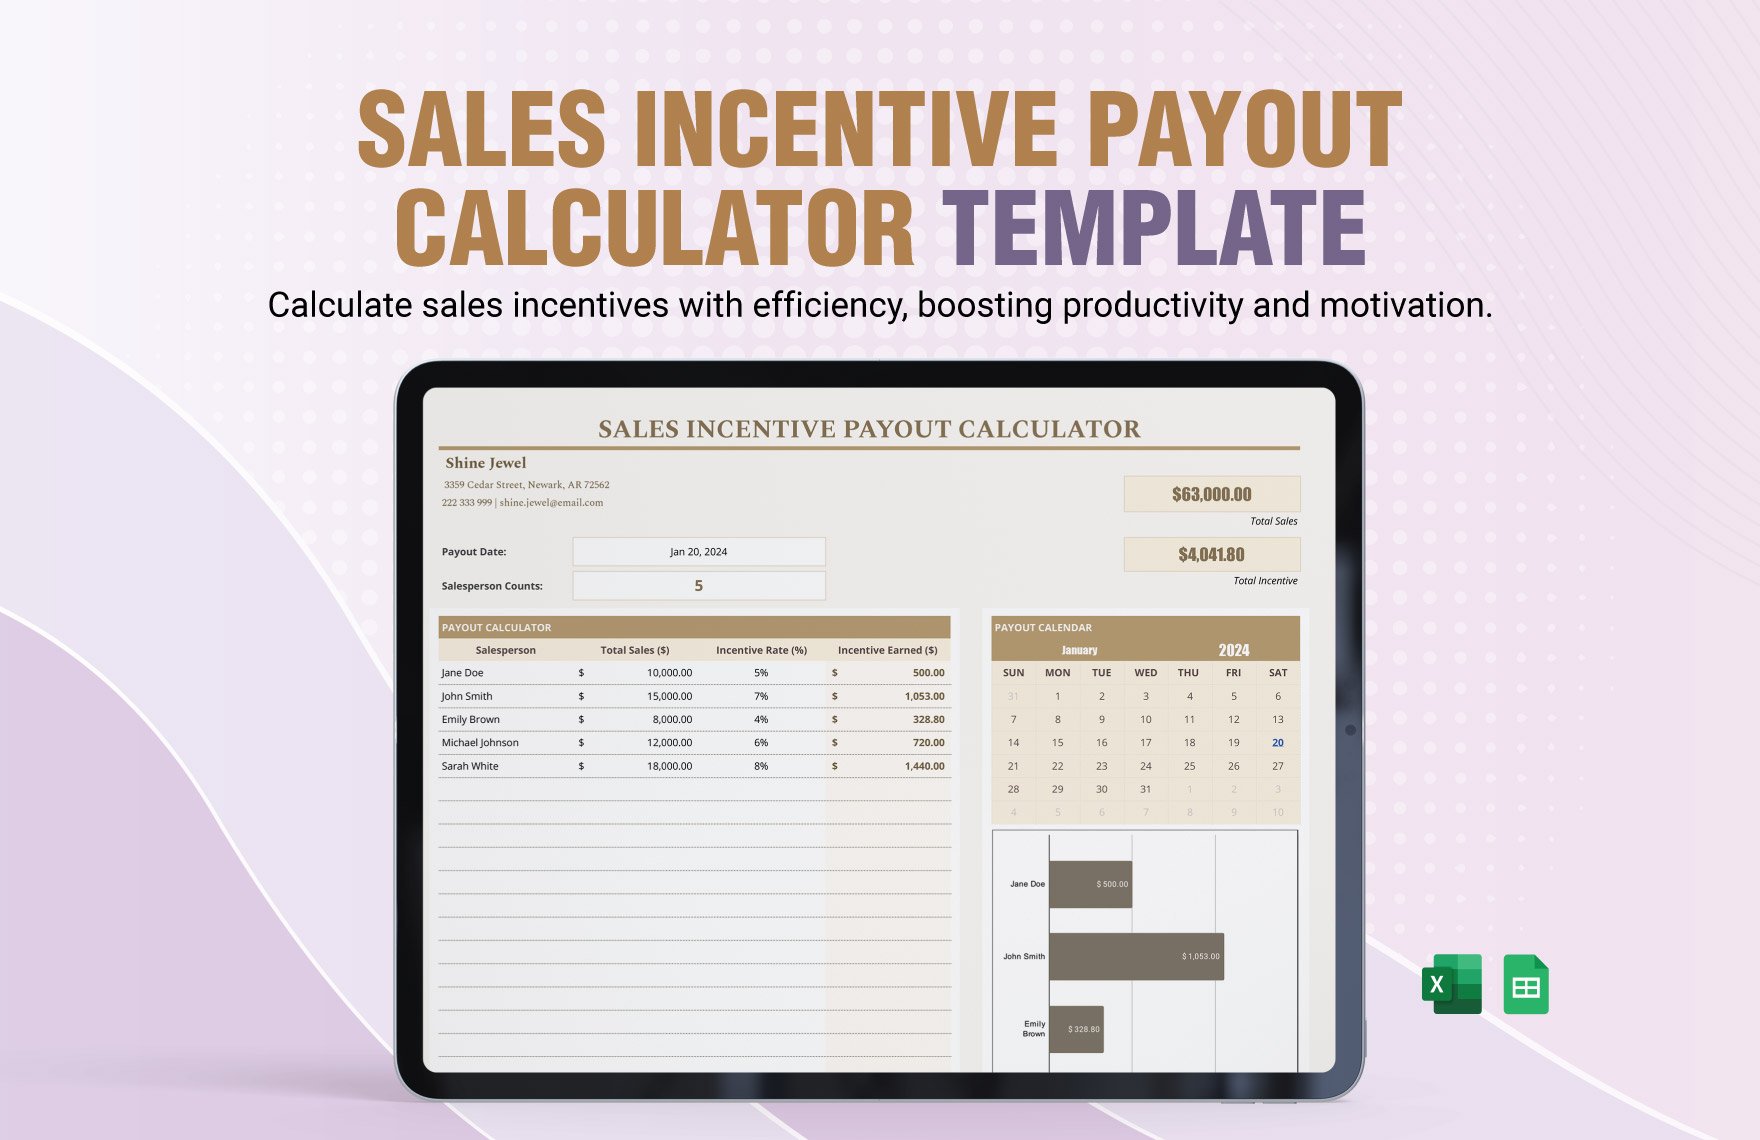 Sales Incentive Payout Calculator Template in Excel, Google Sheets